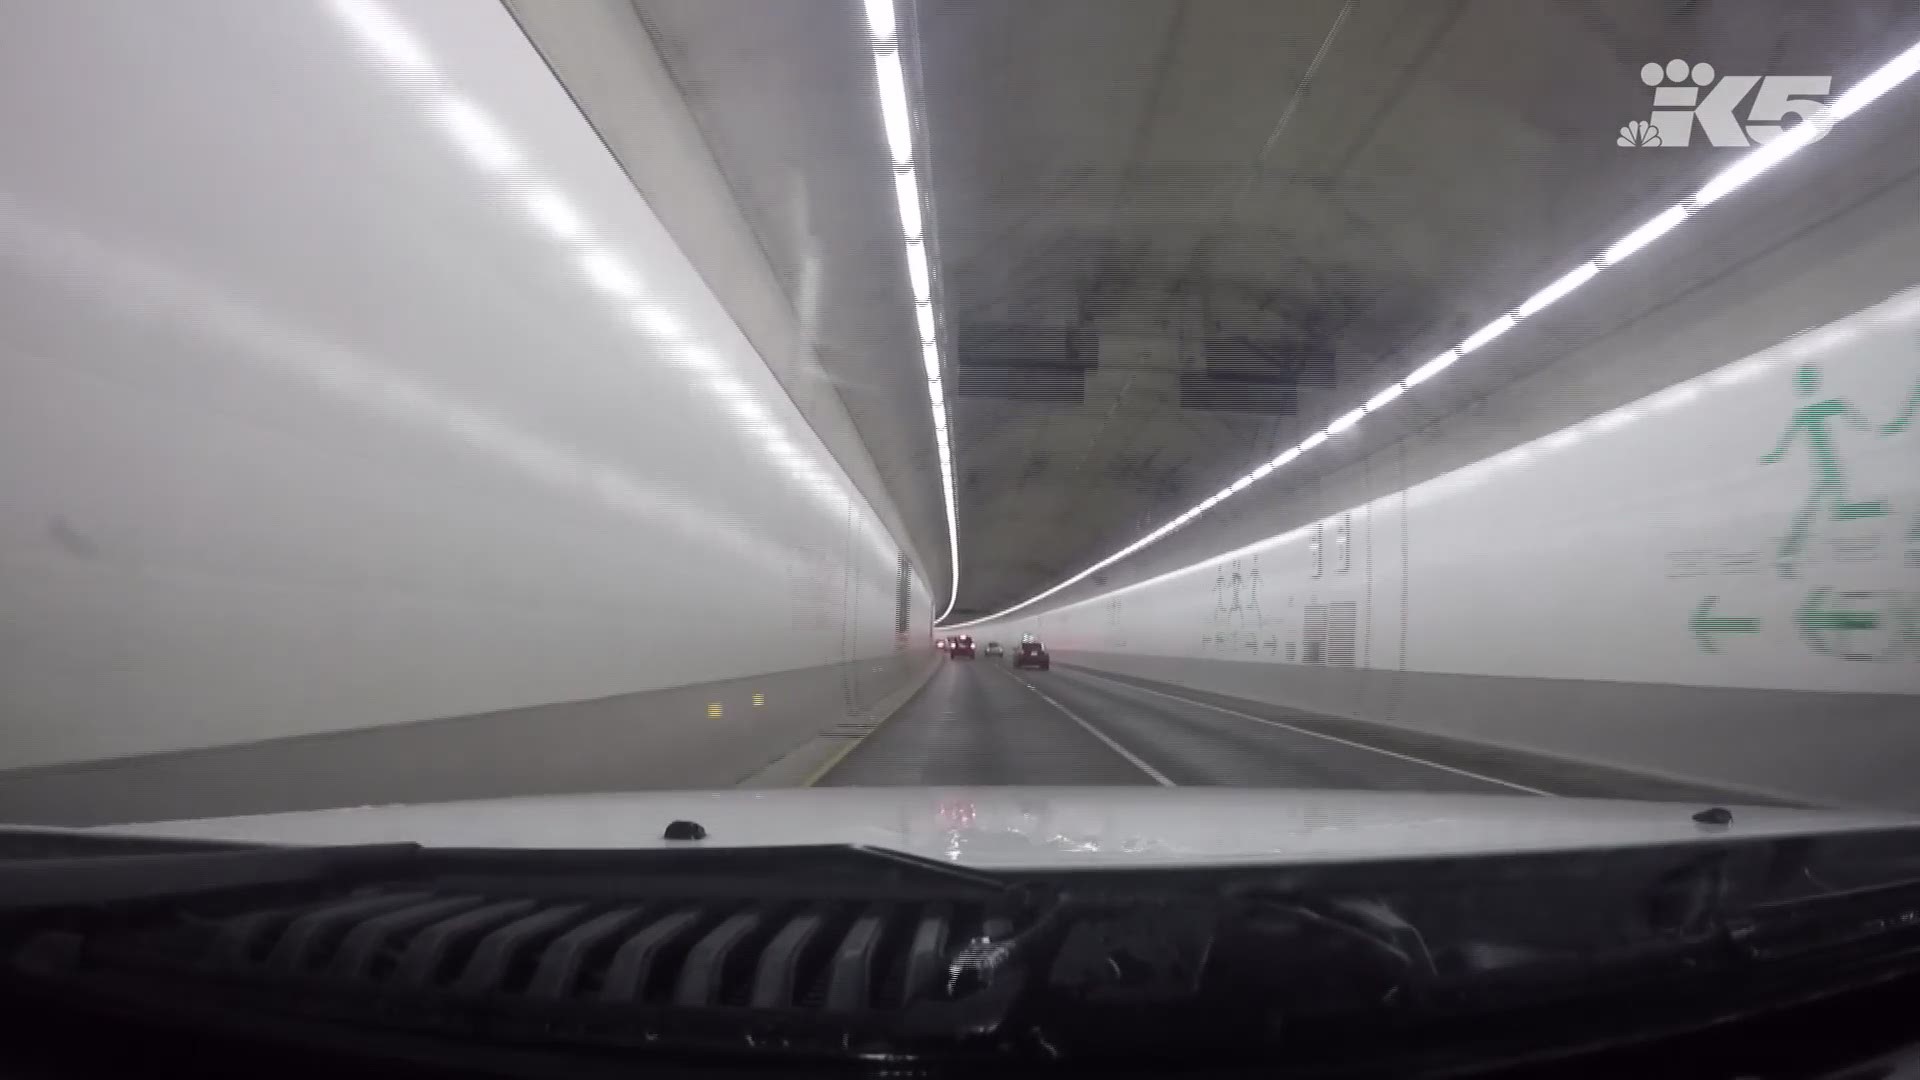 Take a ride through the Seattle tunnel - at timelapse speed!